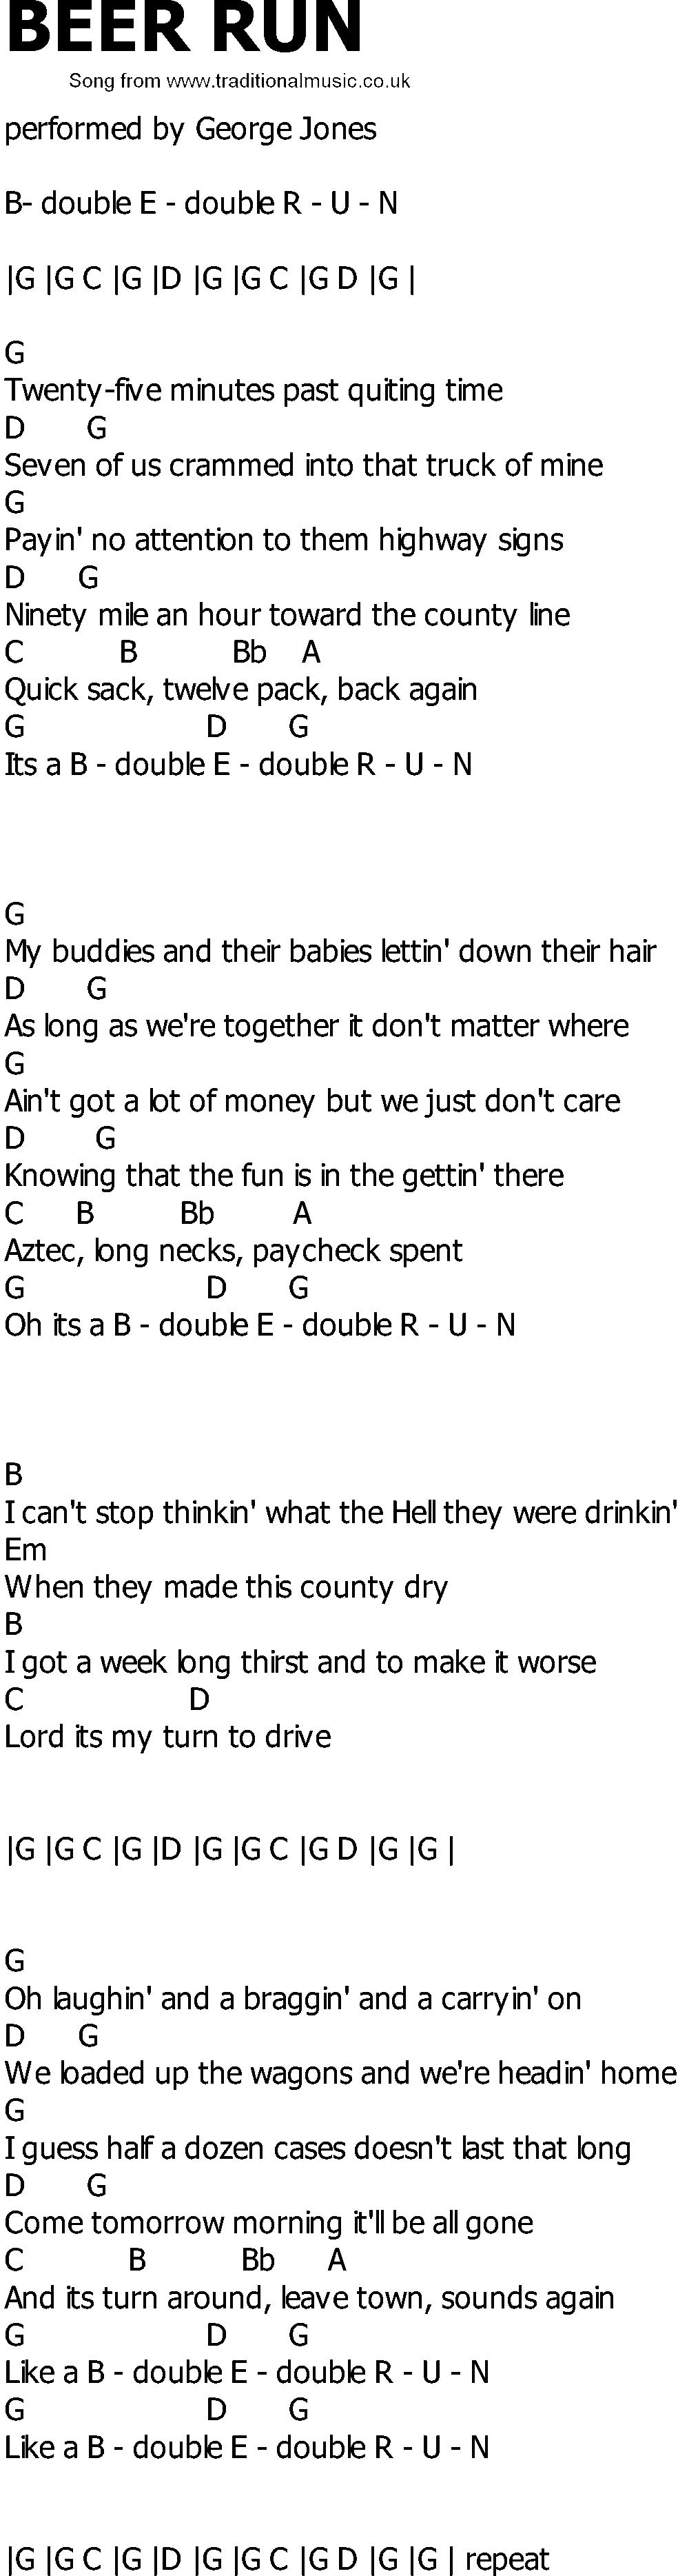 Old Country song lyrics with chords - Beer Run